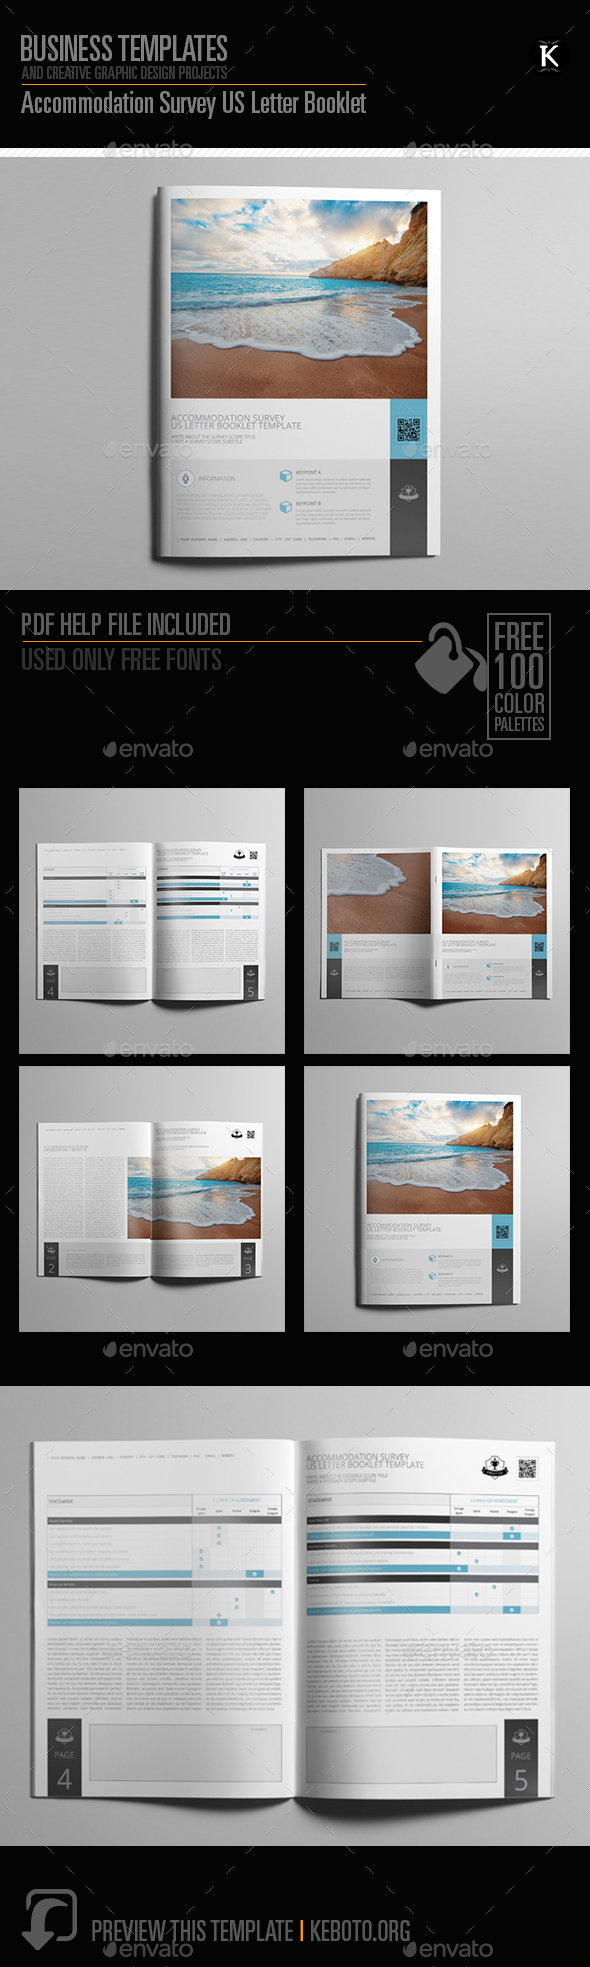 GraphicRiver Accommodation Survey US Letter Booklet 20545995